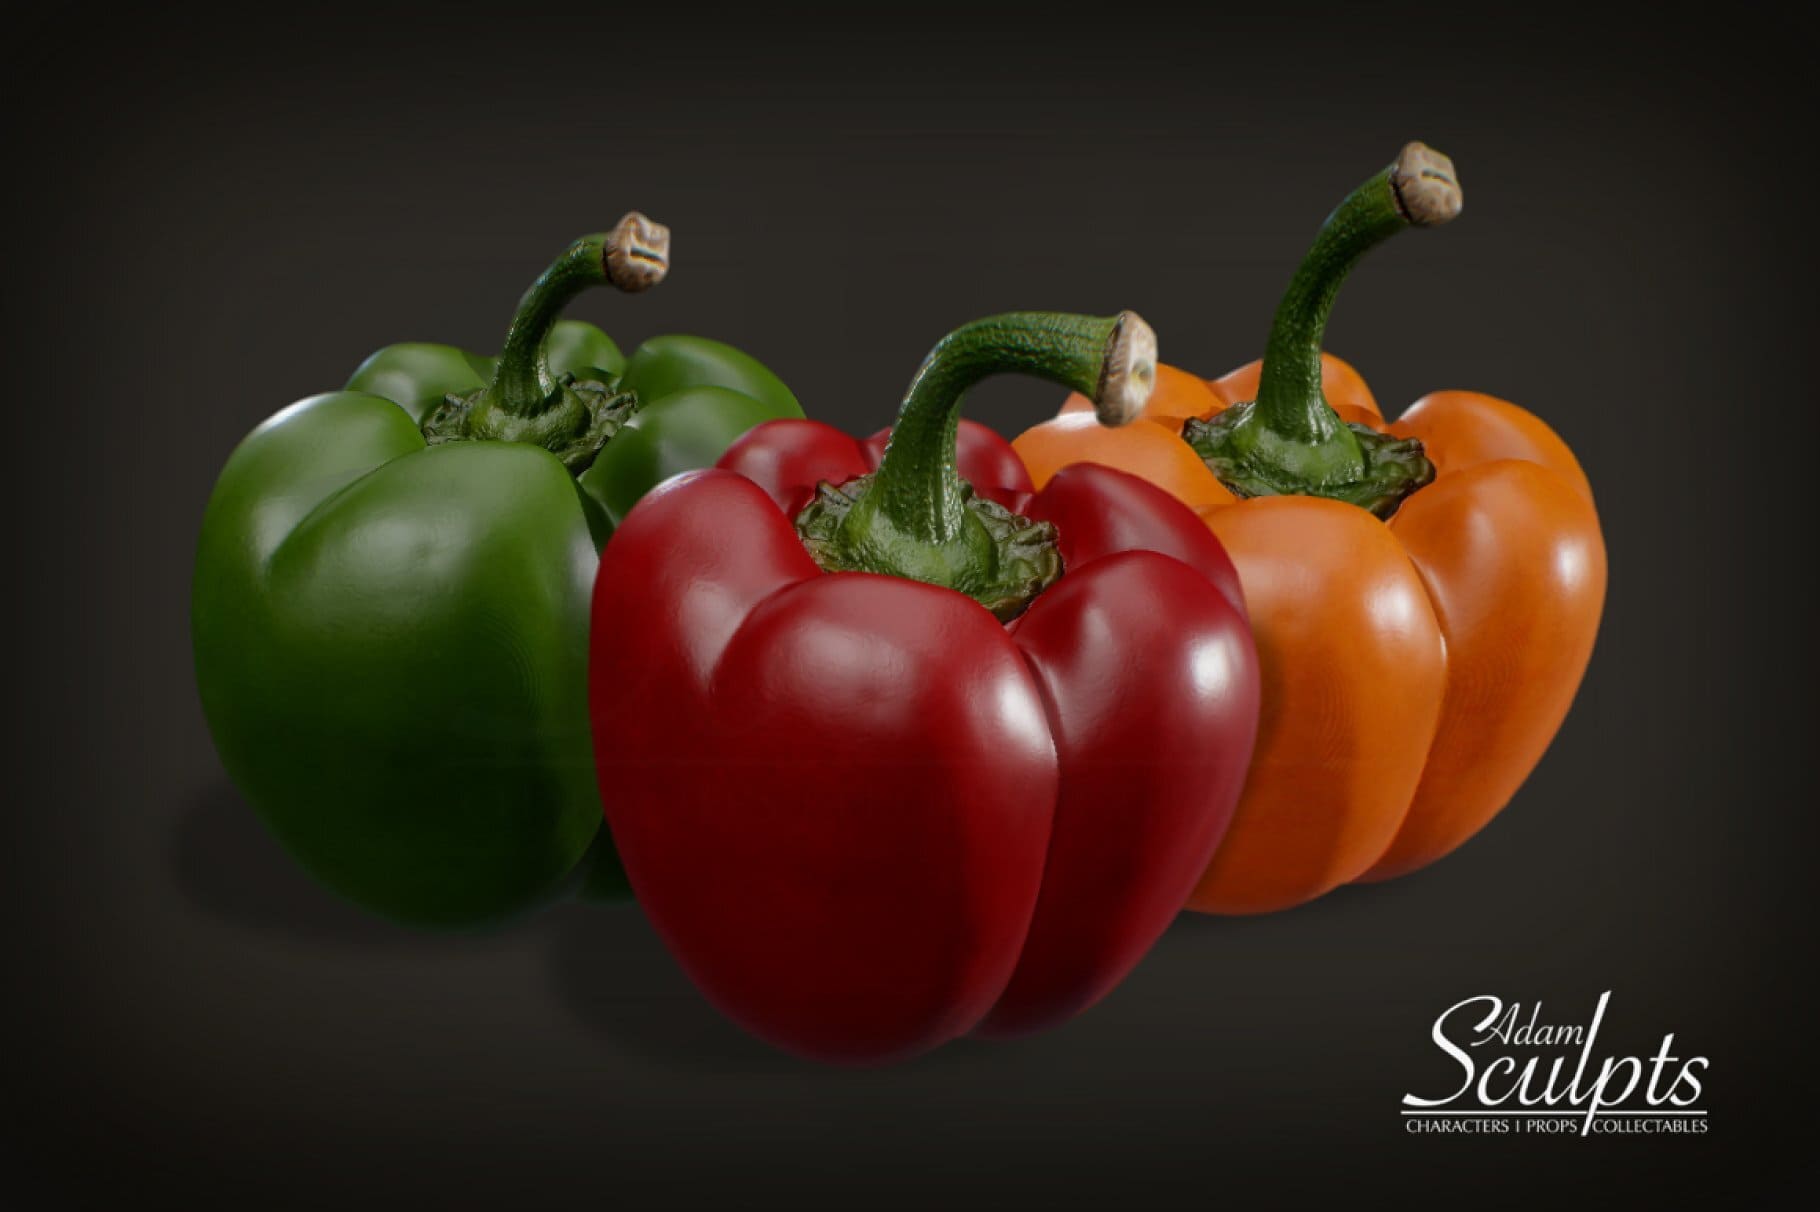 Green, red and yellow peppers on a gray background.